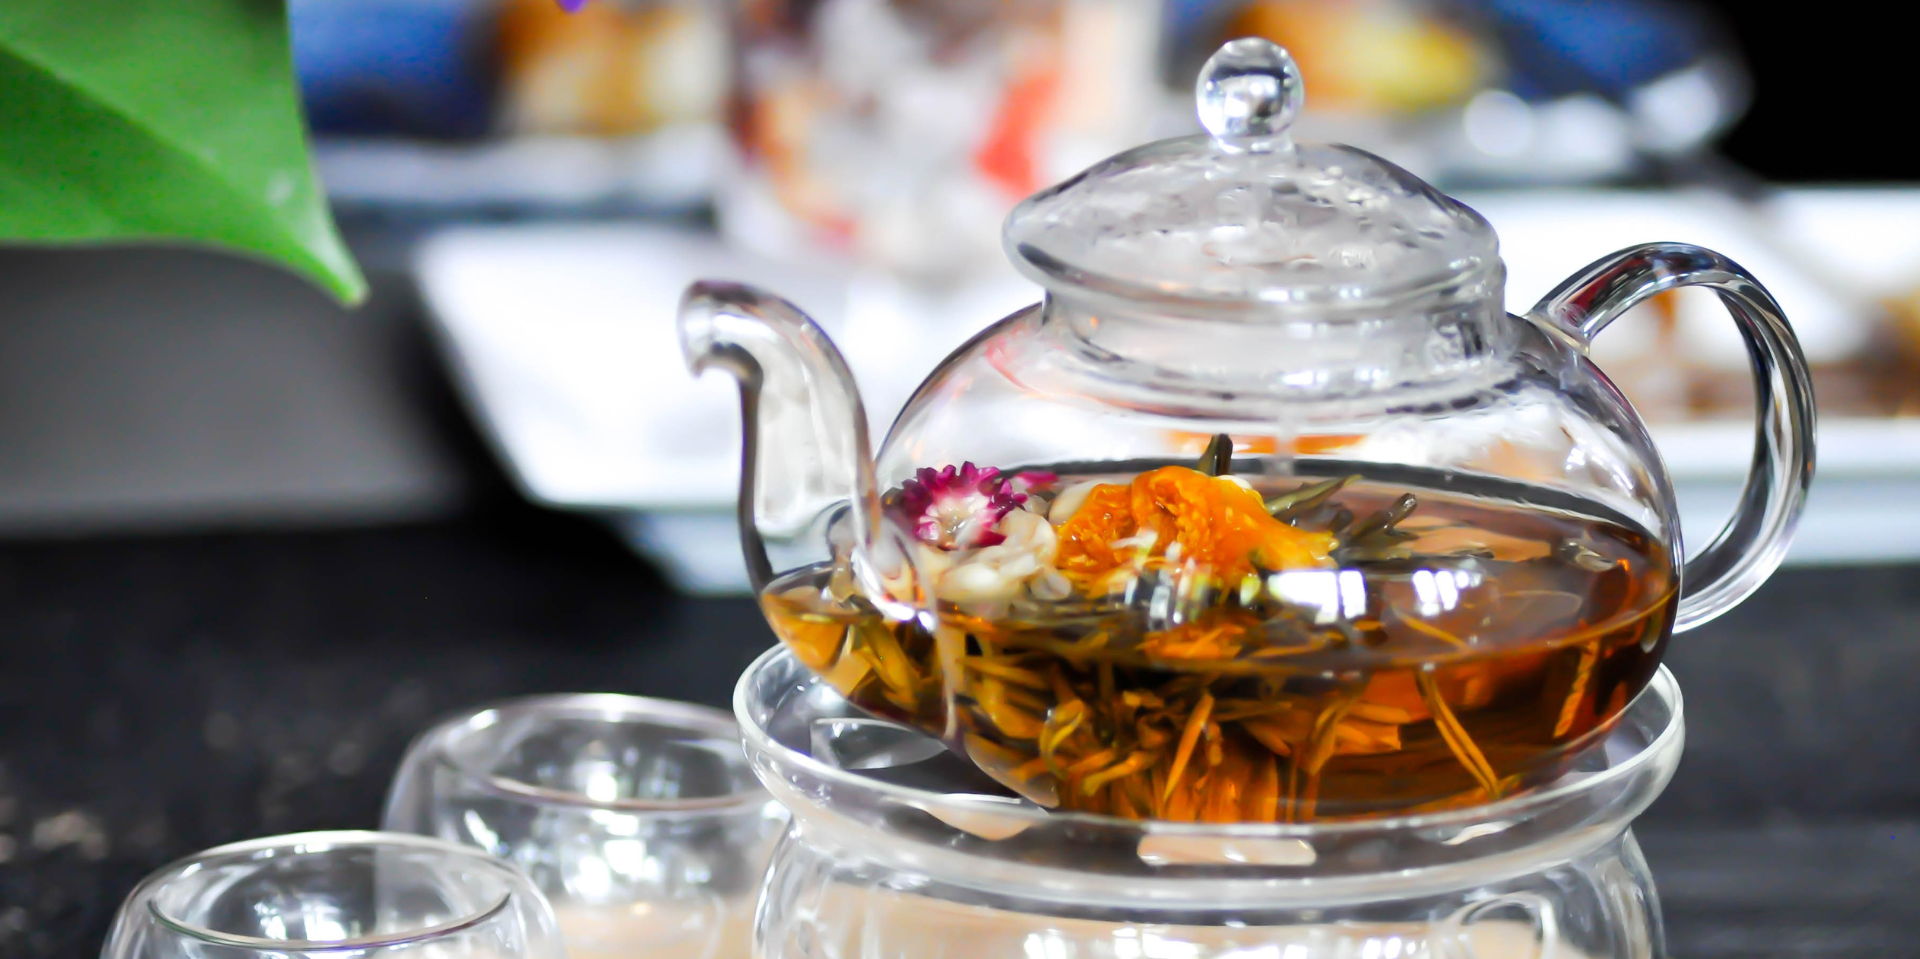 Floral and Flowering Tea with The Tea Smith promotional image